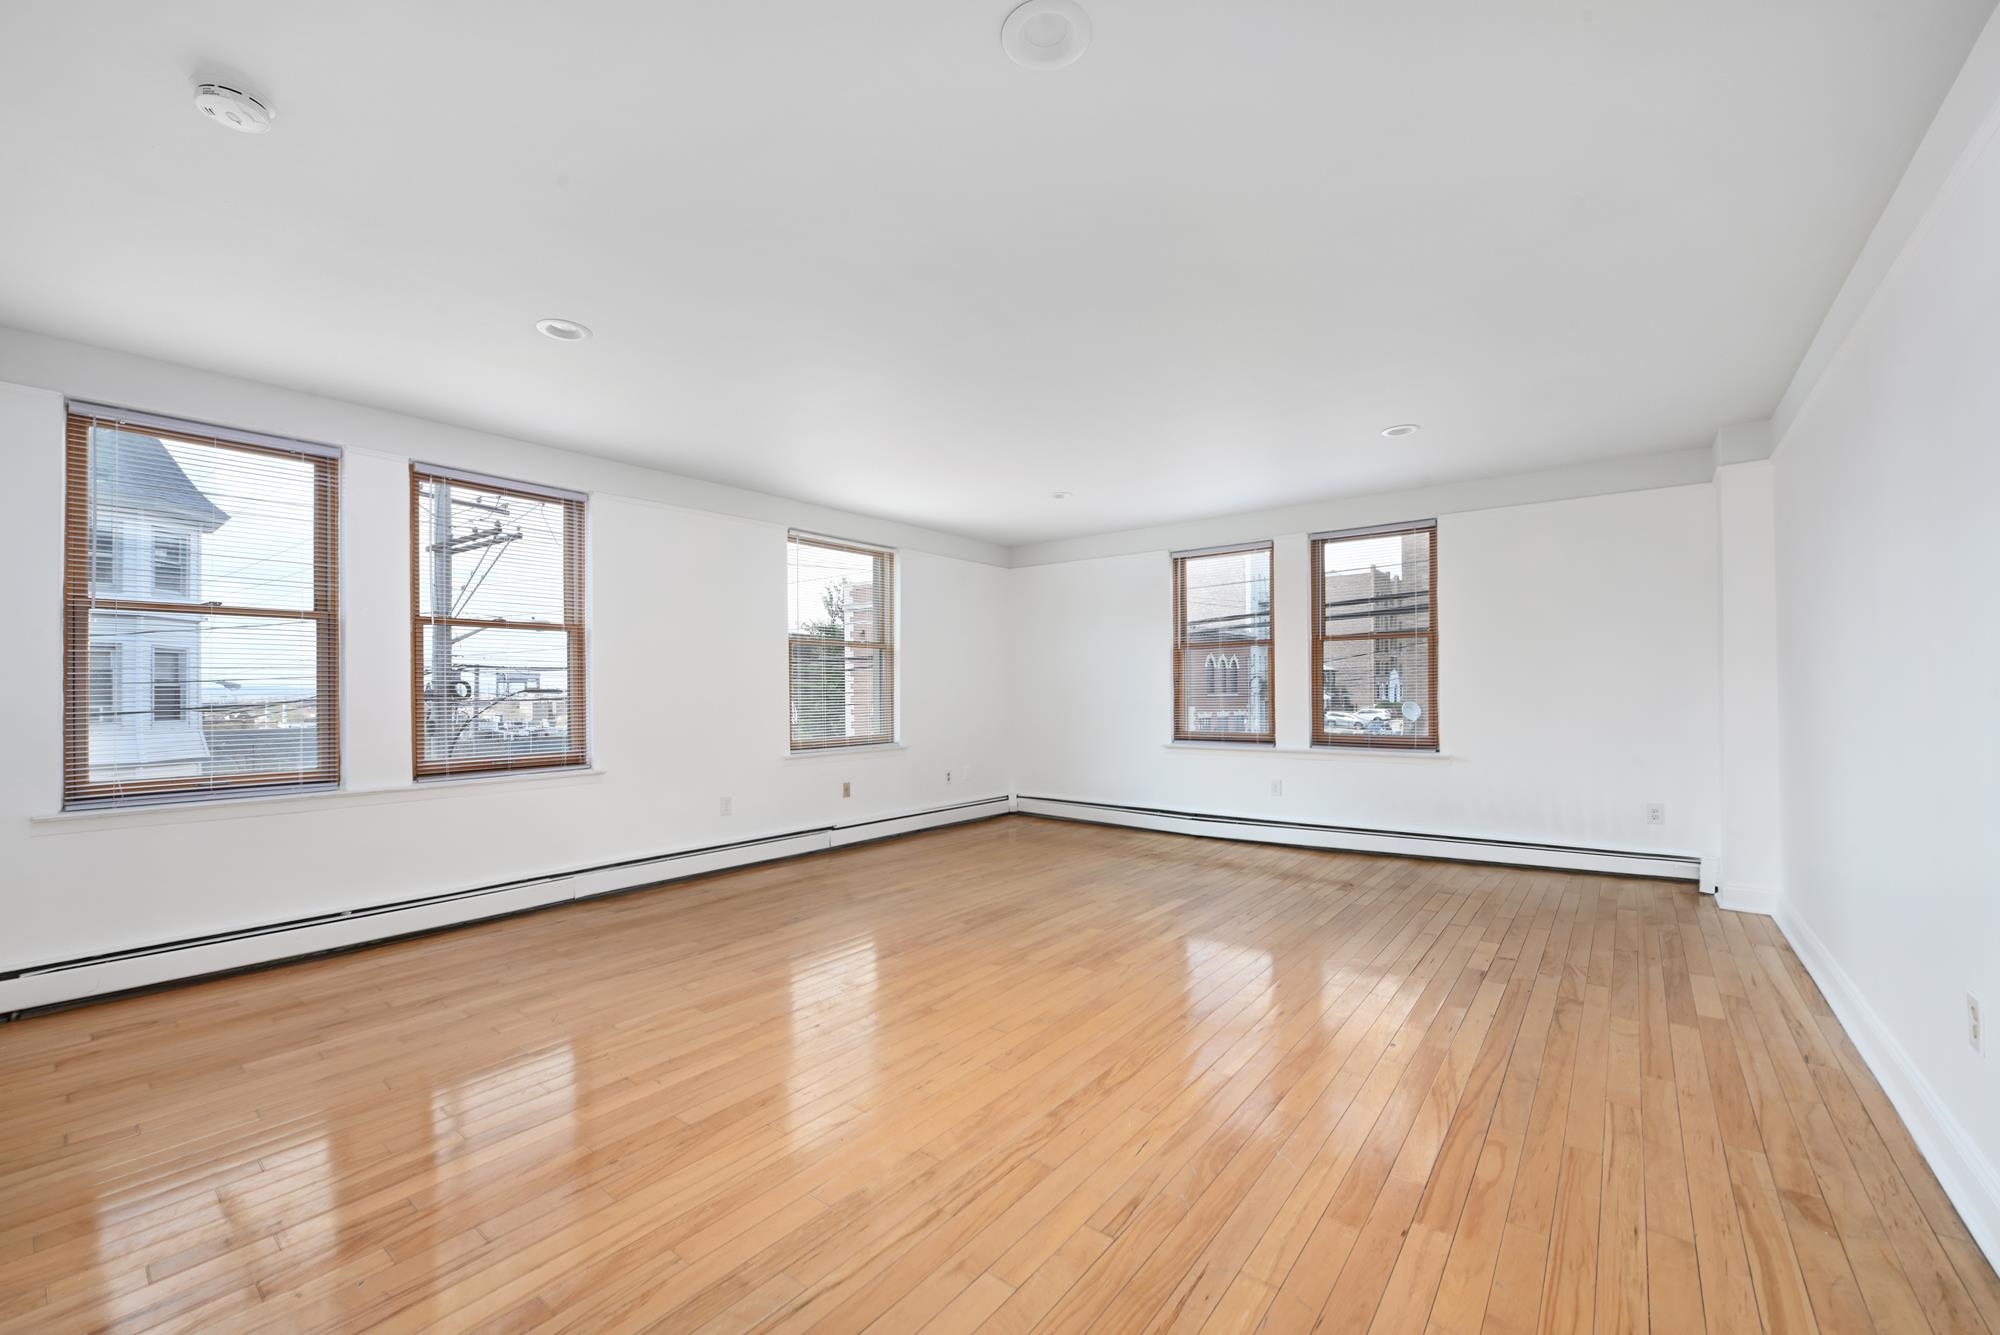 # 240007351 - For Rent in JERSEY CITY - Journal Square NJ